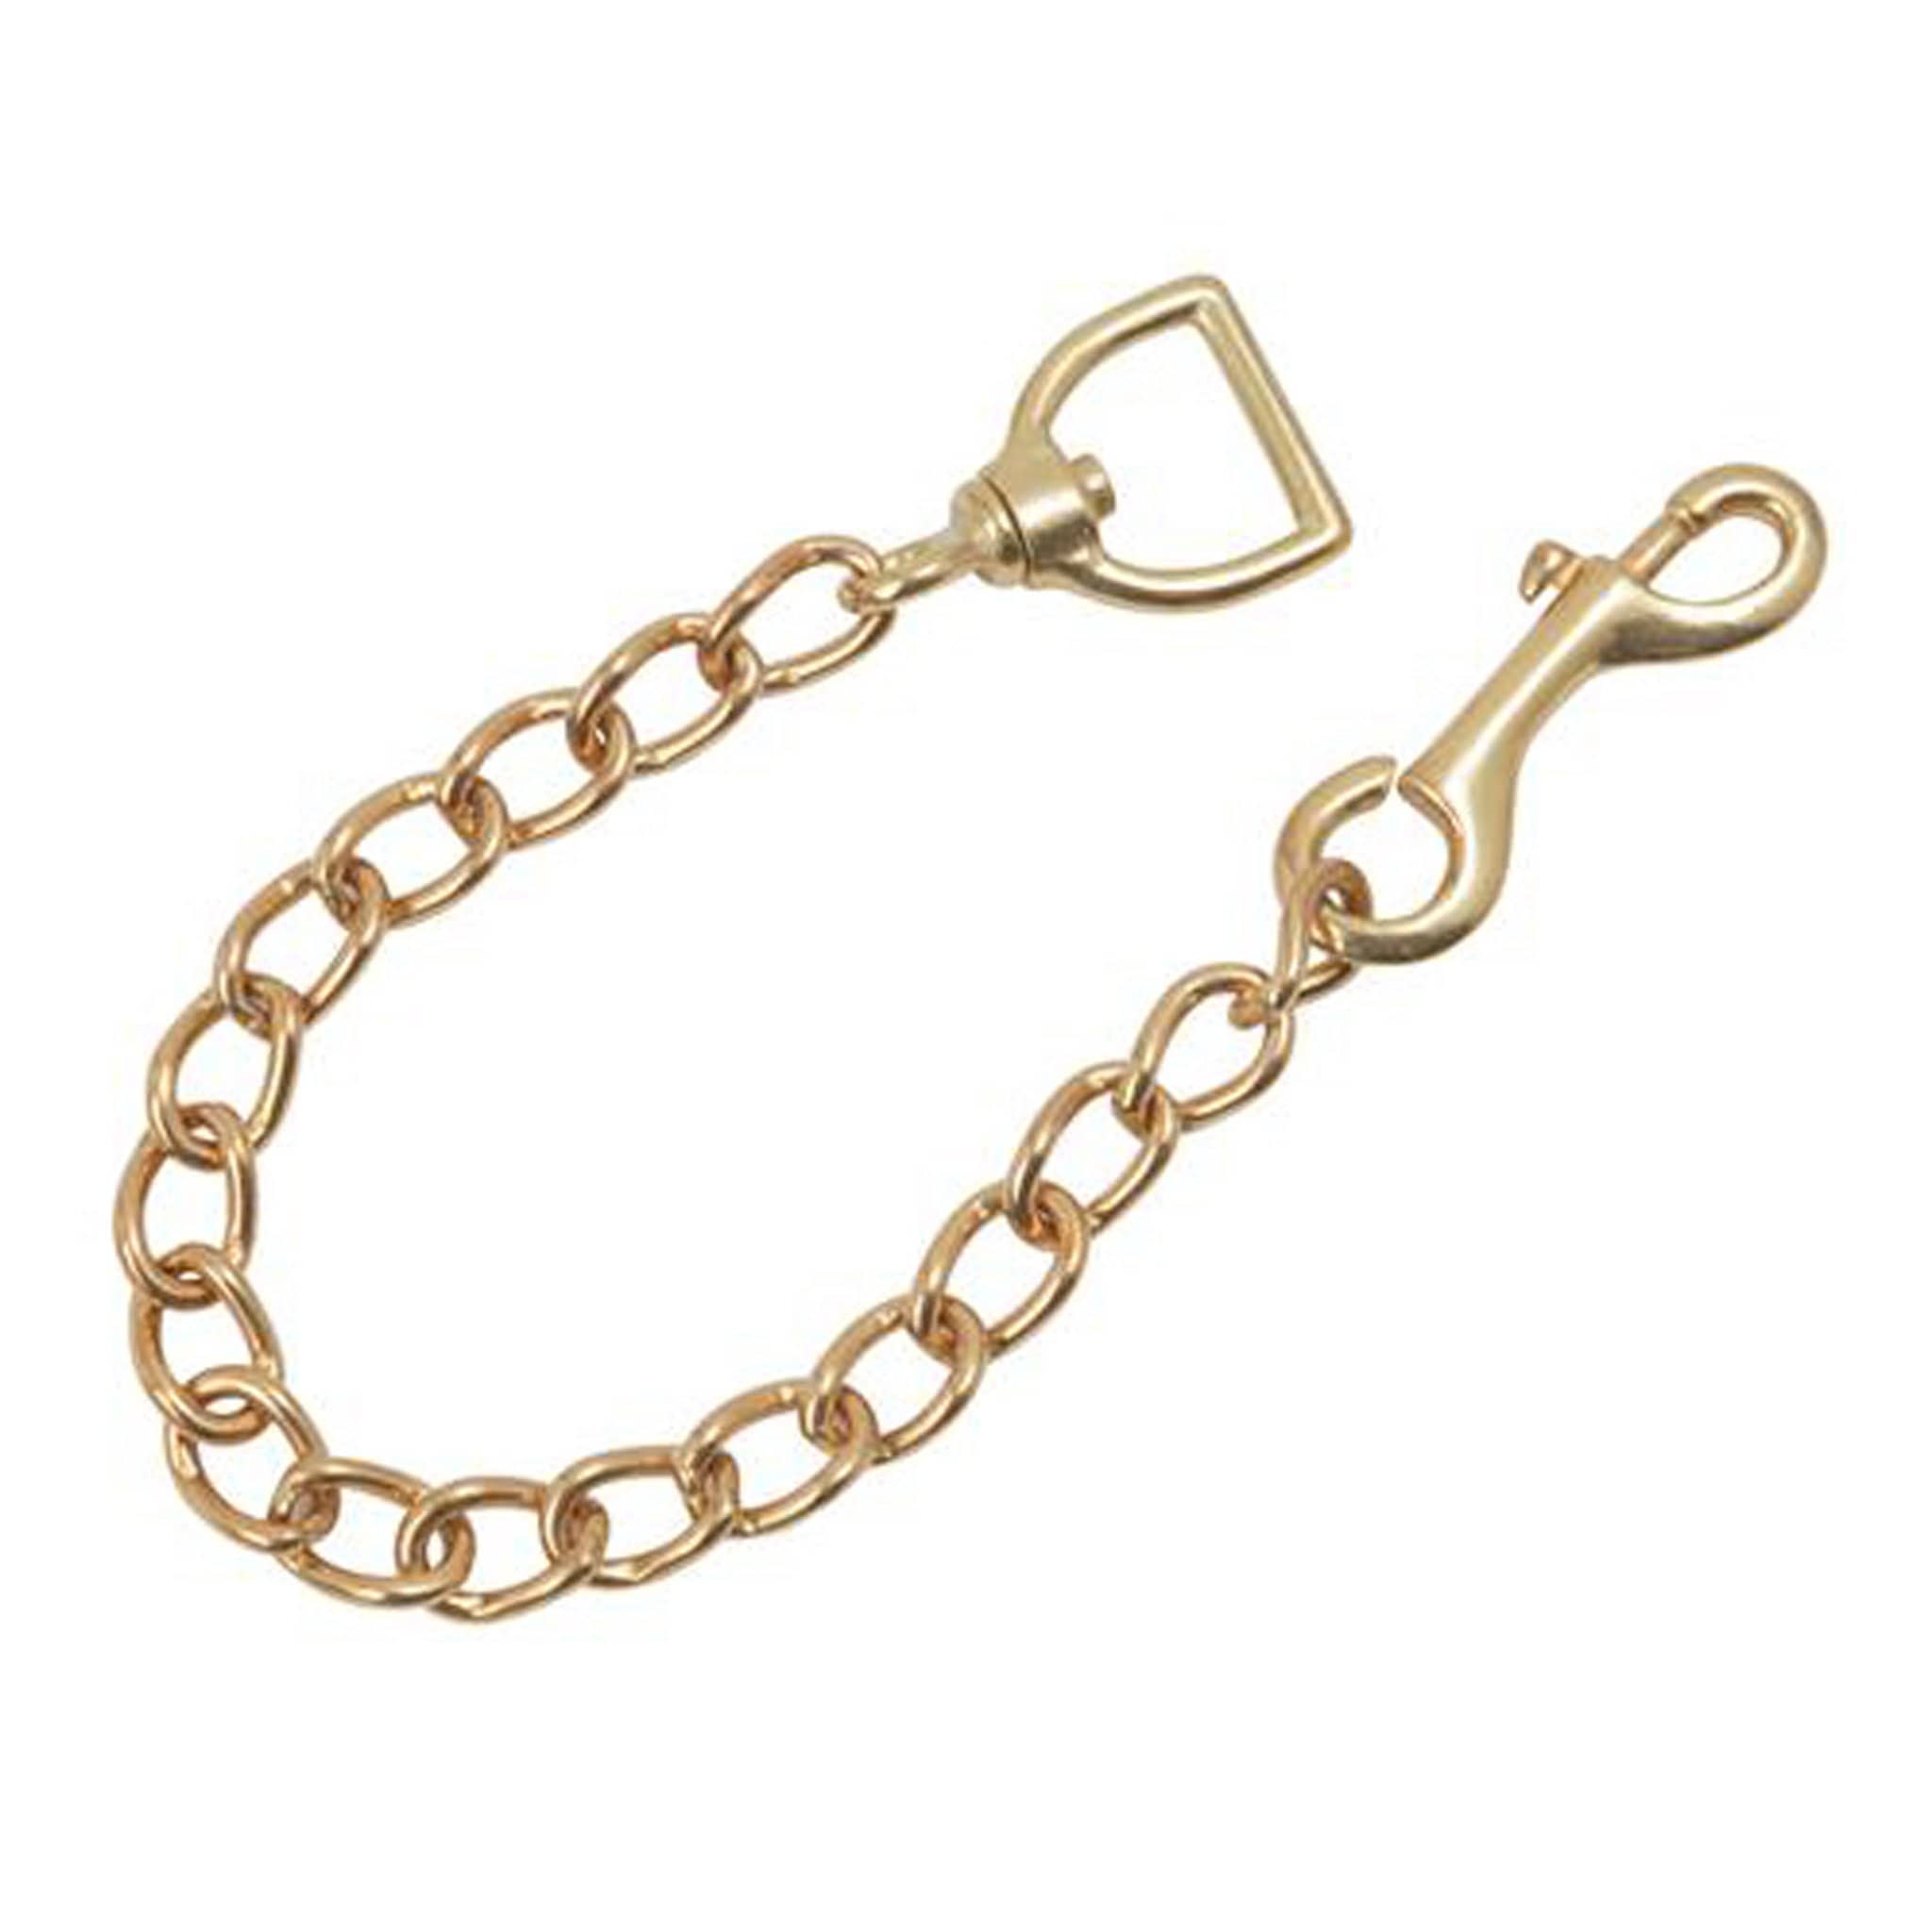 Shires Lead Rein Chain 652